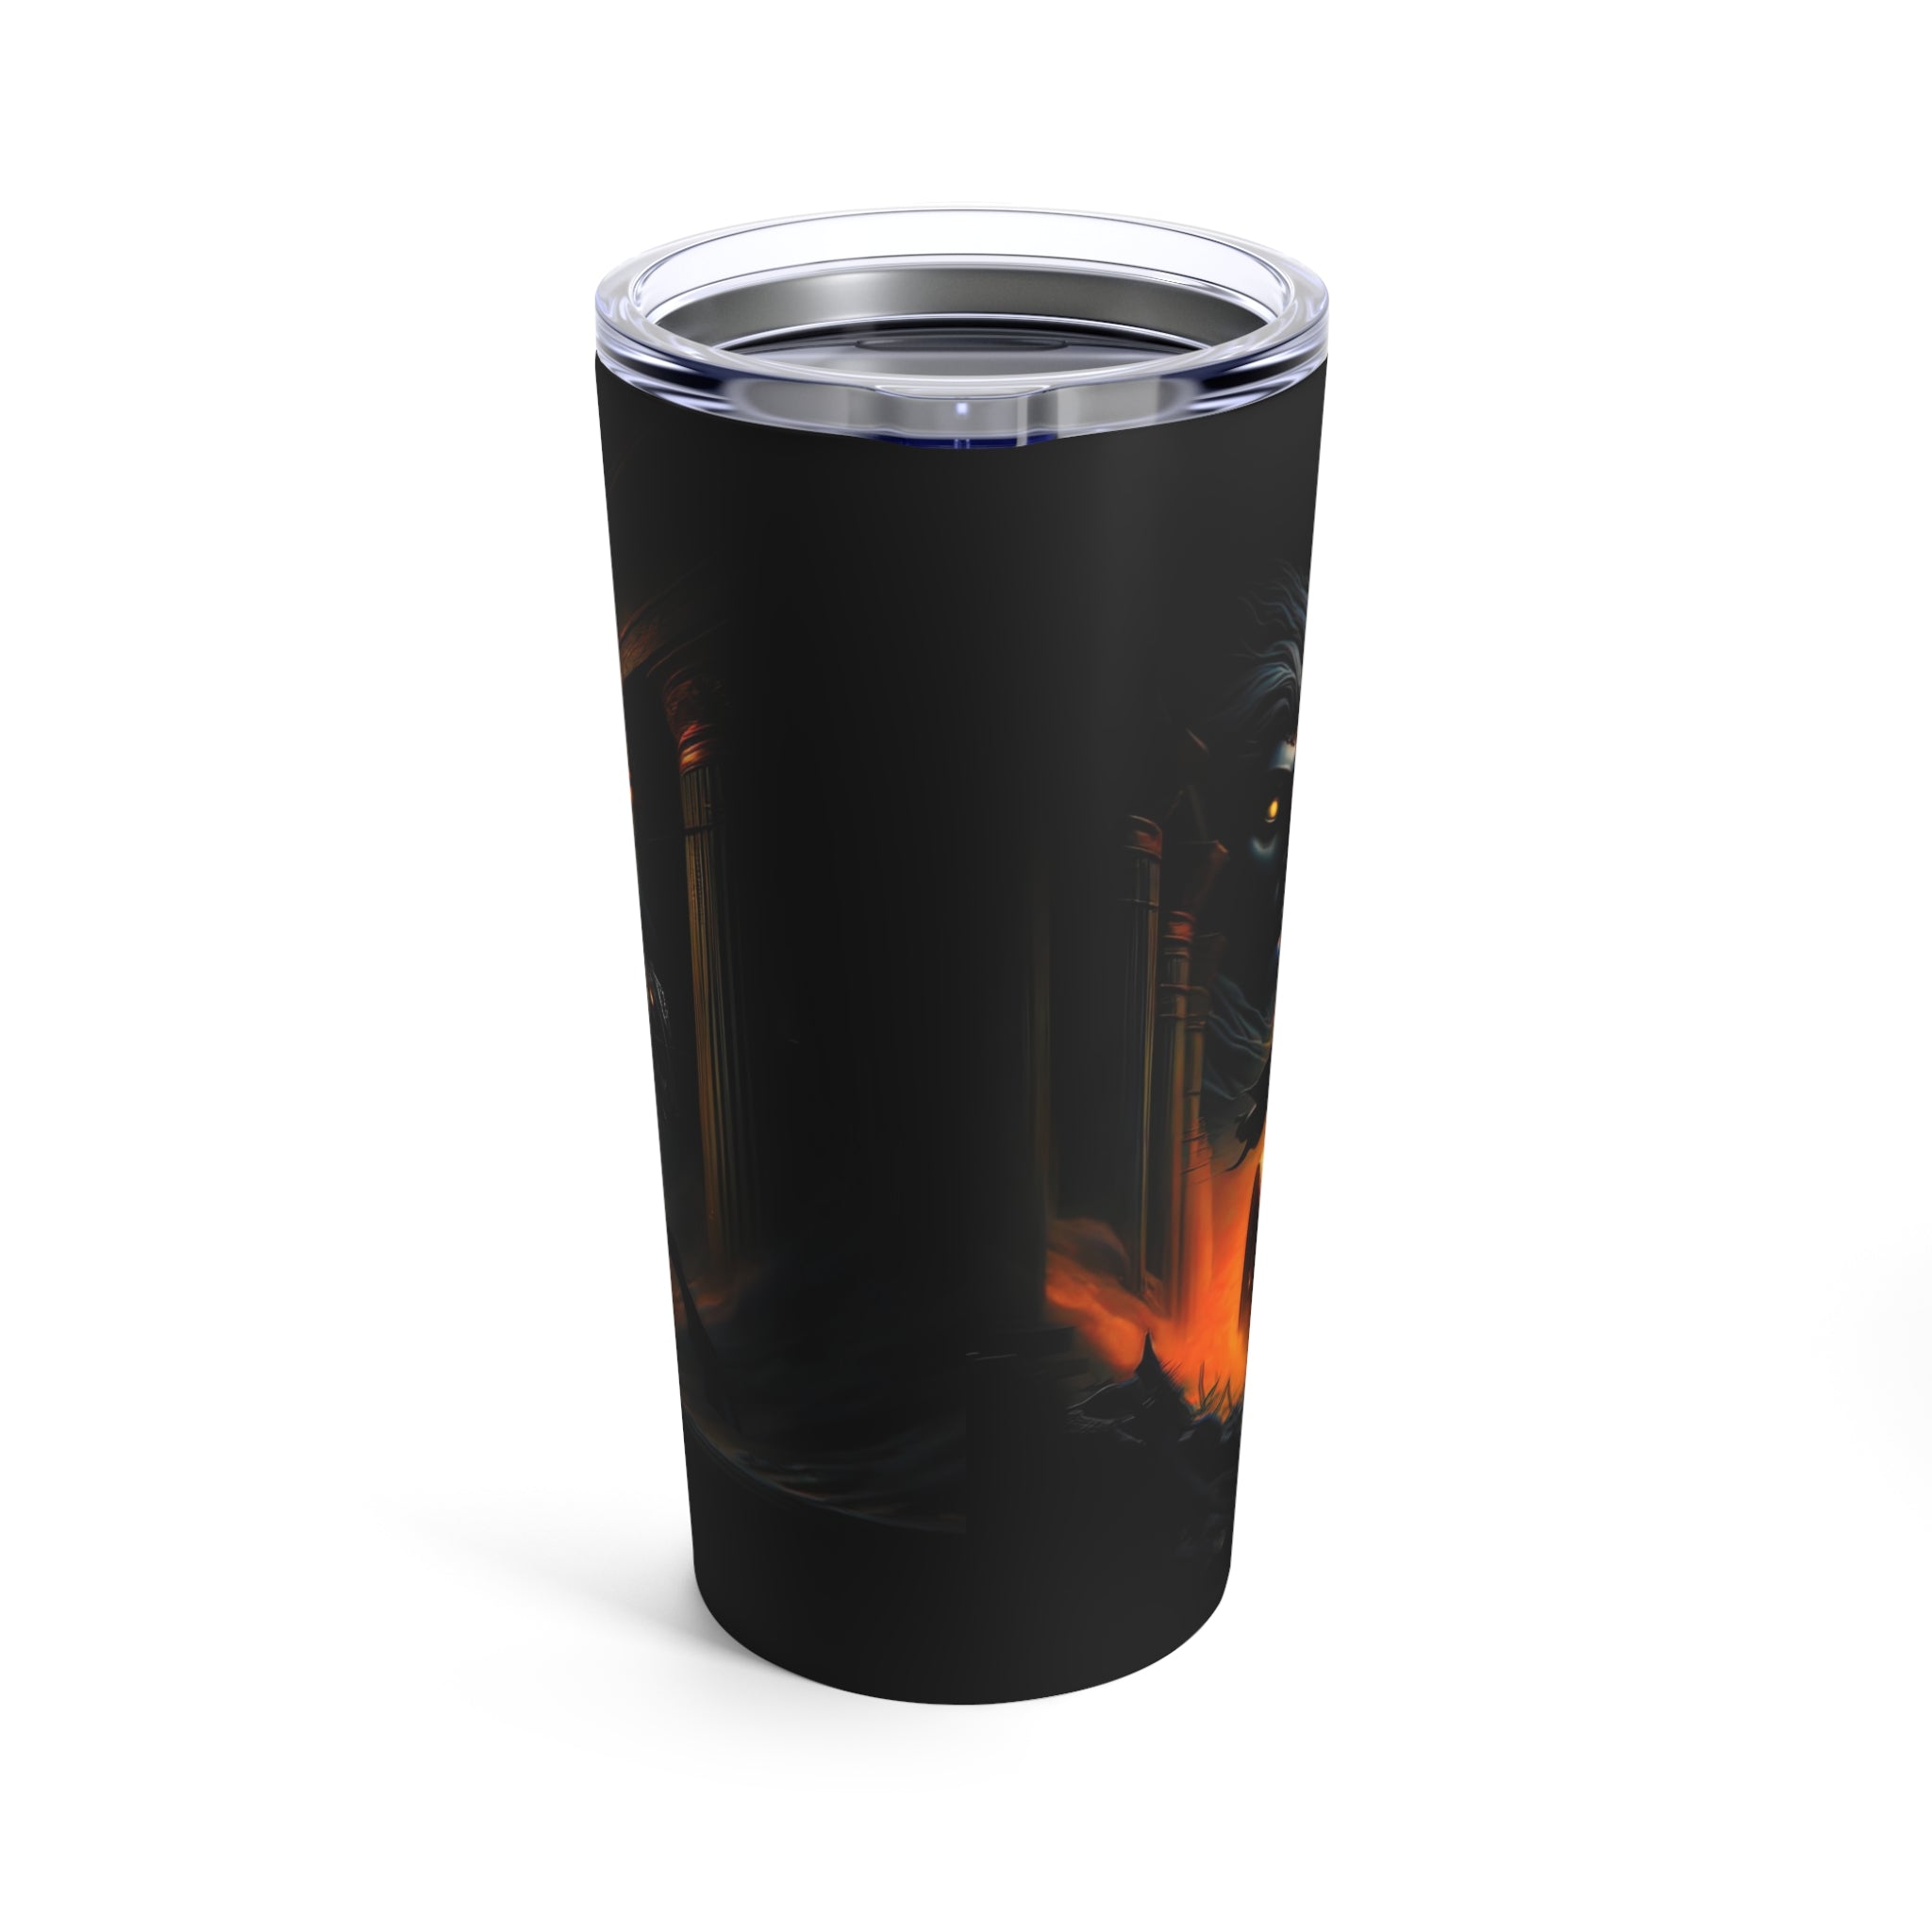 Chariot of the Tempest Tumbler 20oz